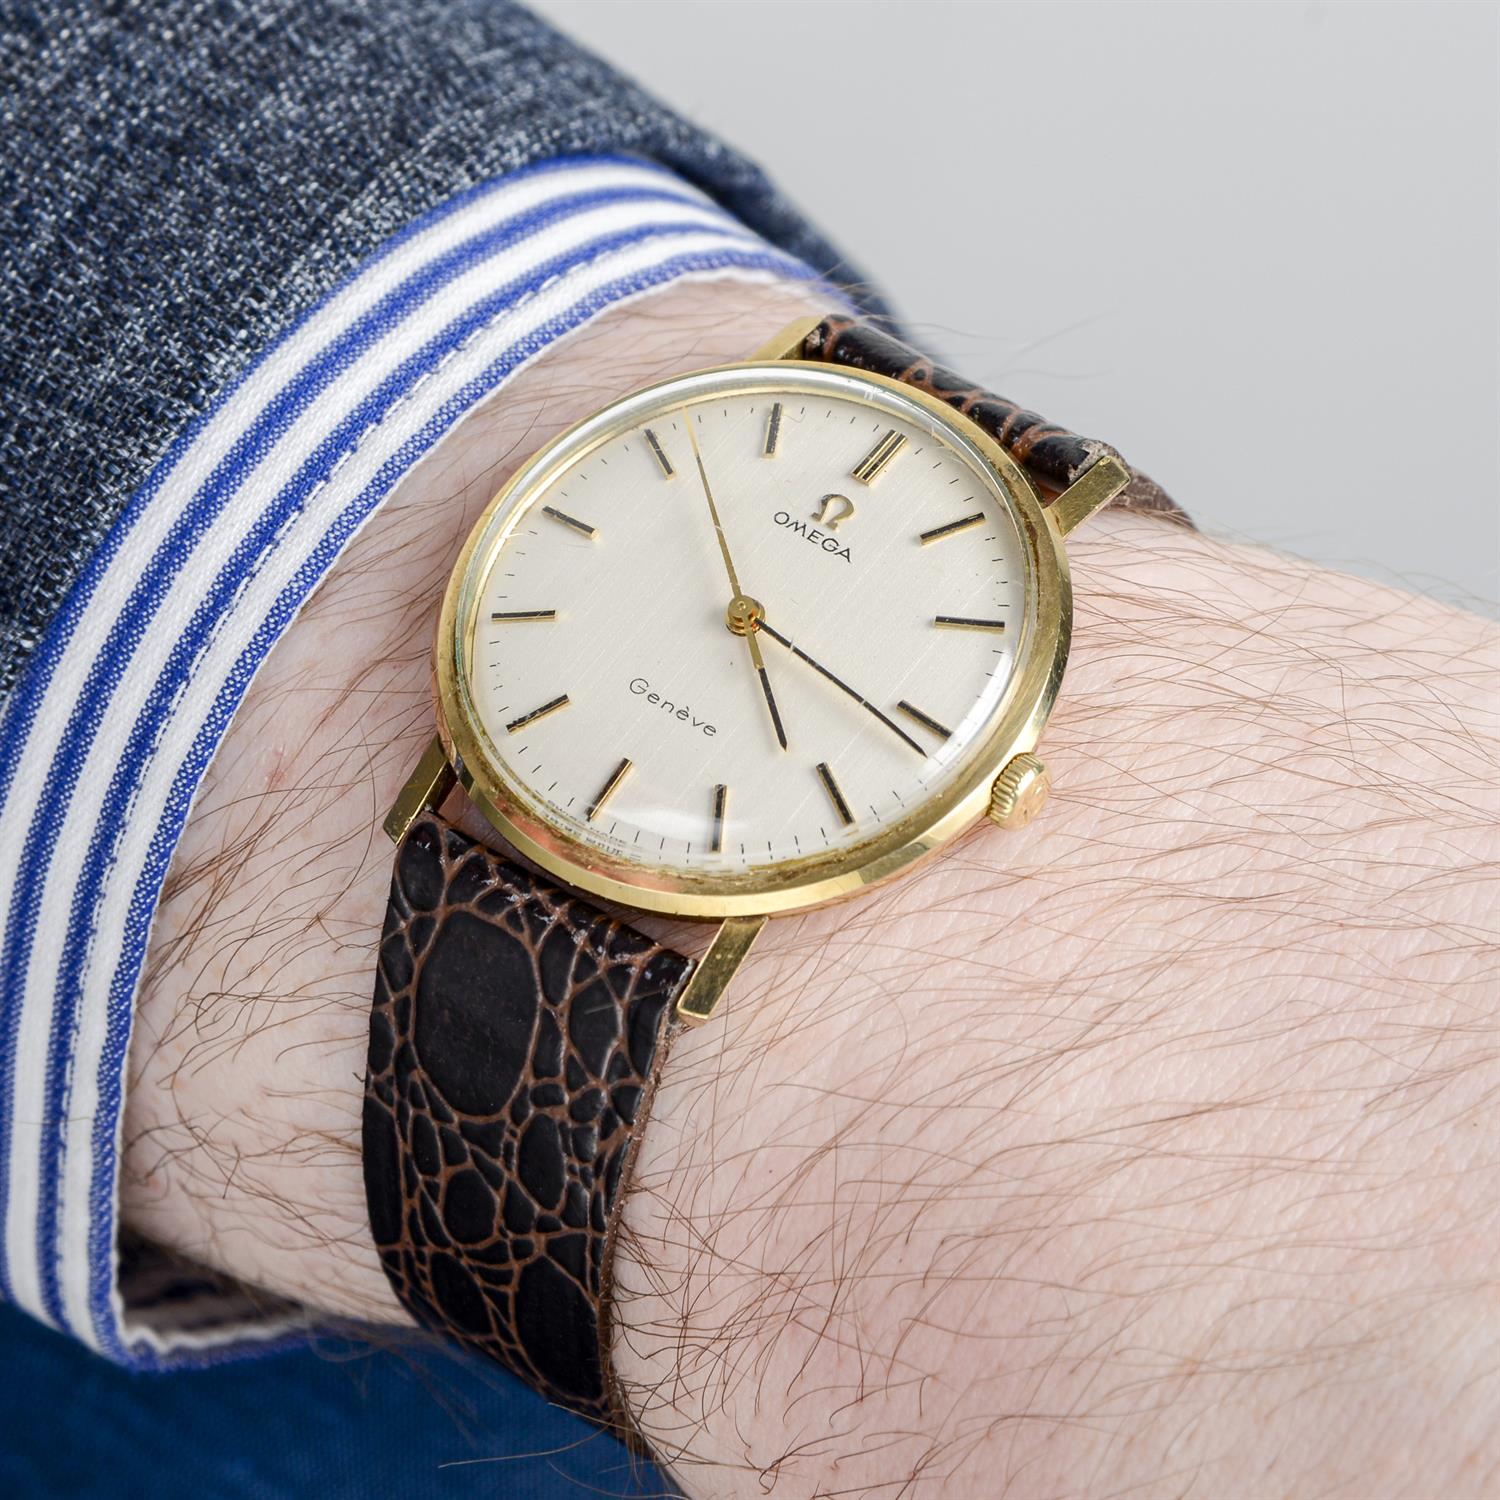 Omega - a Geneve watch, 33mm. - Image 5 of 5